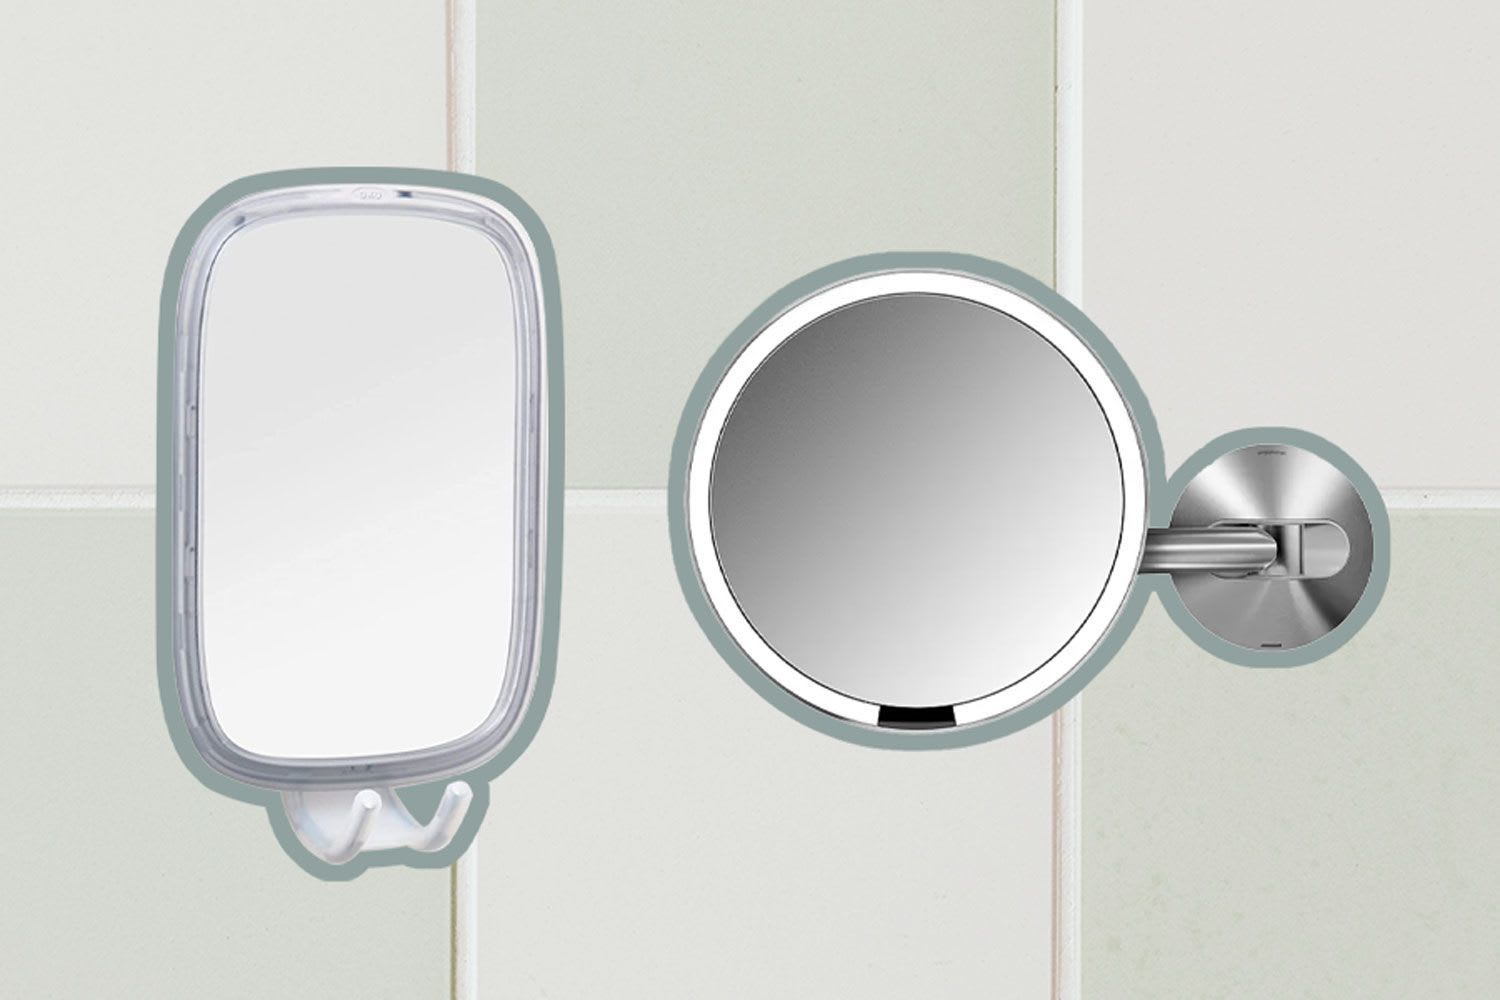 The Best Shower Mirrors That Will Seriously Improve Your Routine